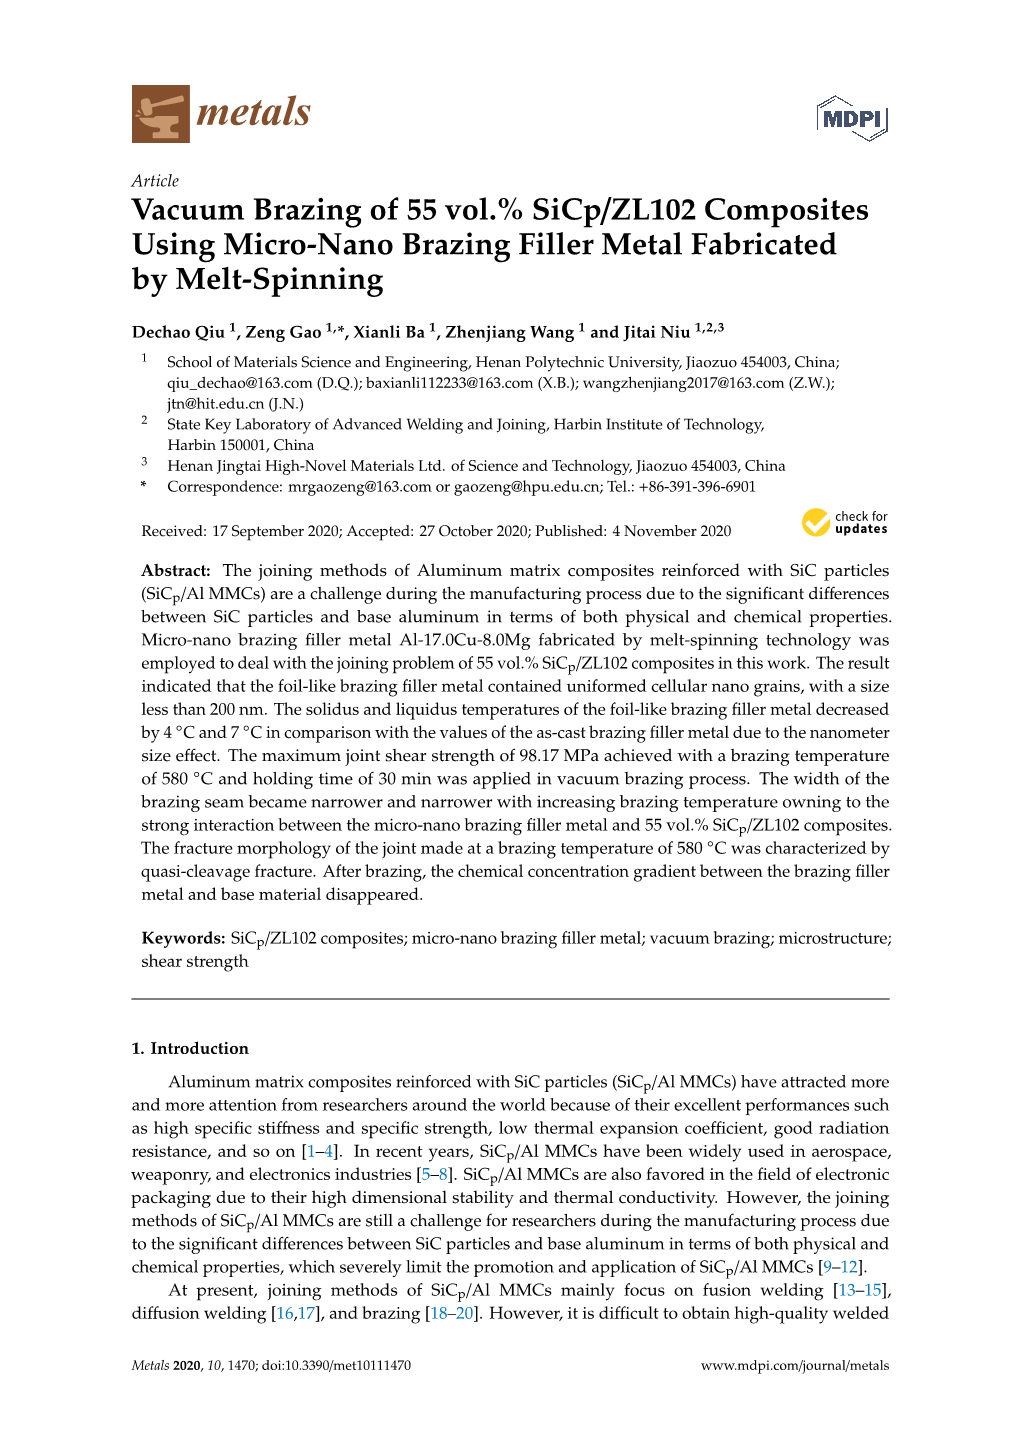 Vacuum Brazing of 55 Vol.% Sicp/ZL102 Composites Using Micro-Nano Brazing Filler Metal Fabricated by Melt-Spinning